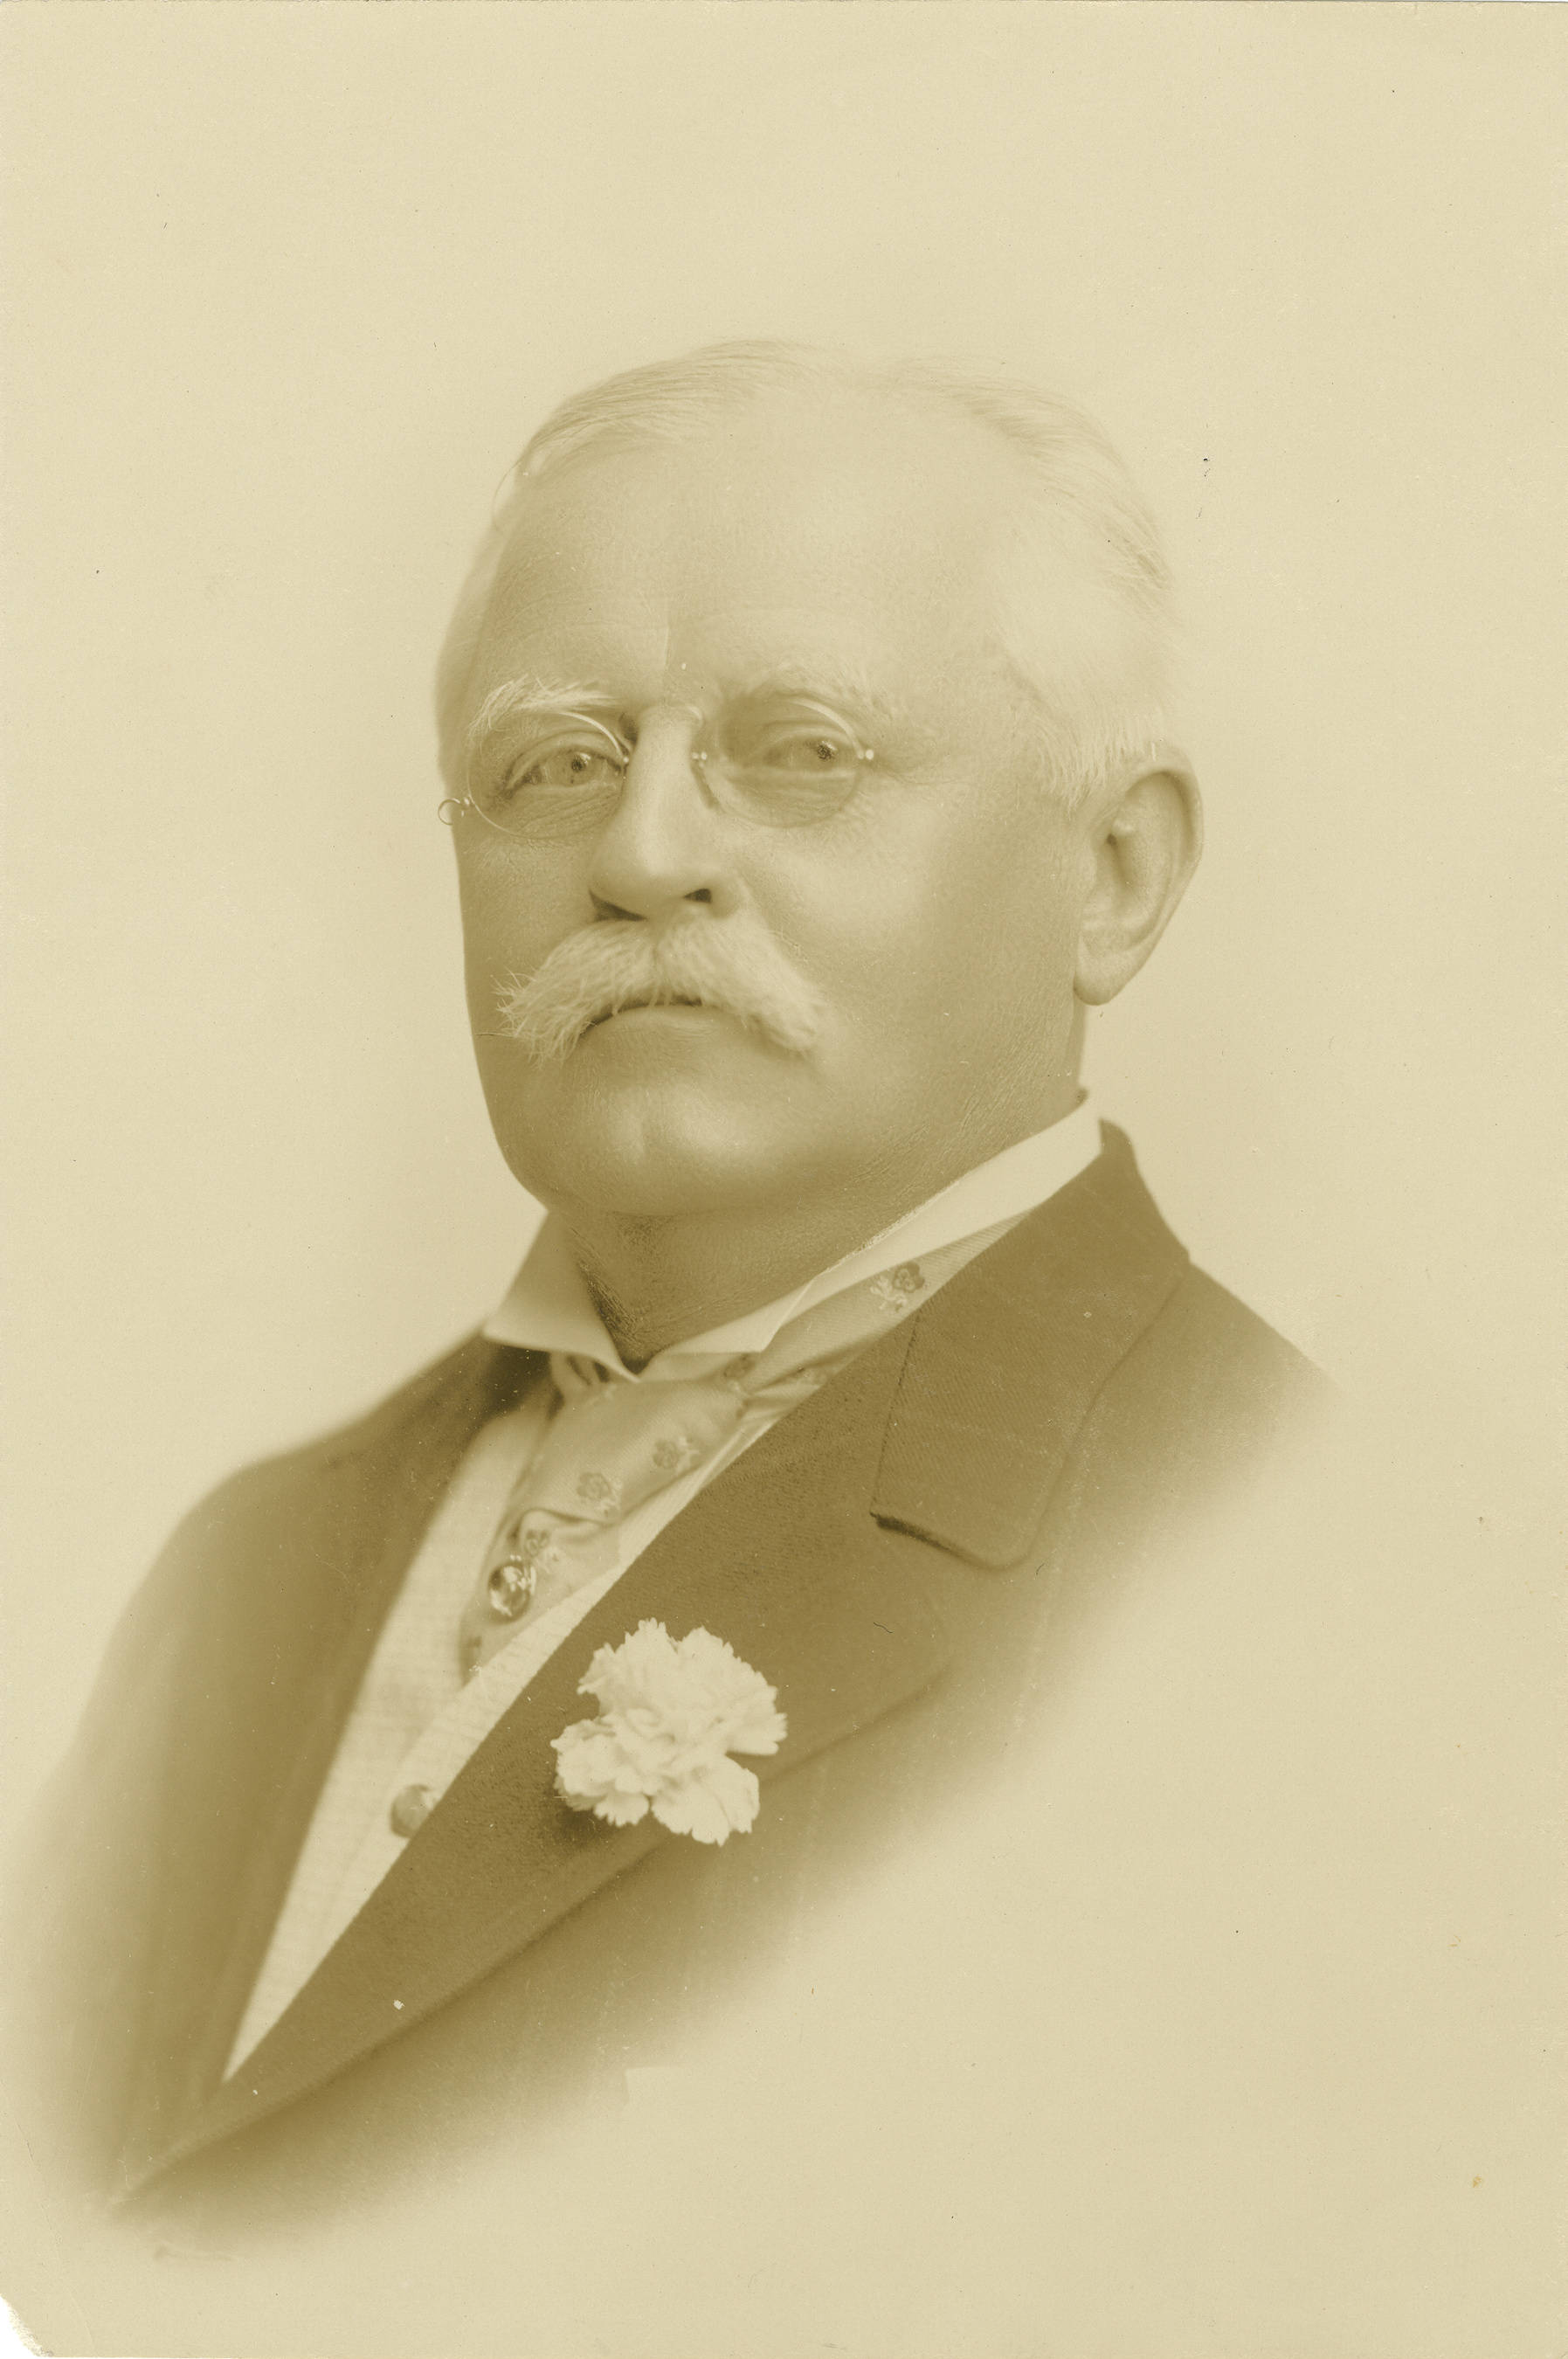 "A posed portrait of a man with short gray hair and mustache, wearing a jacket, necktie with pin, pince-nez eyeglasses, and a carnation on his jacket lapel, facing left and looking at the camera." Source: The Carolina Story.